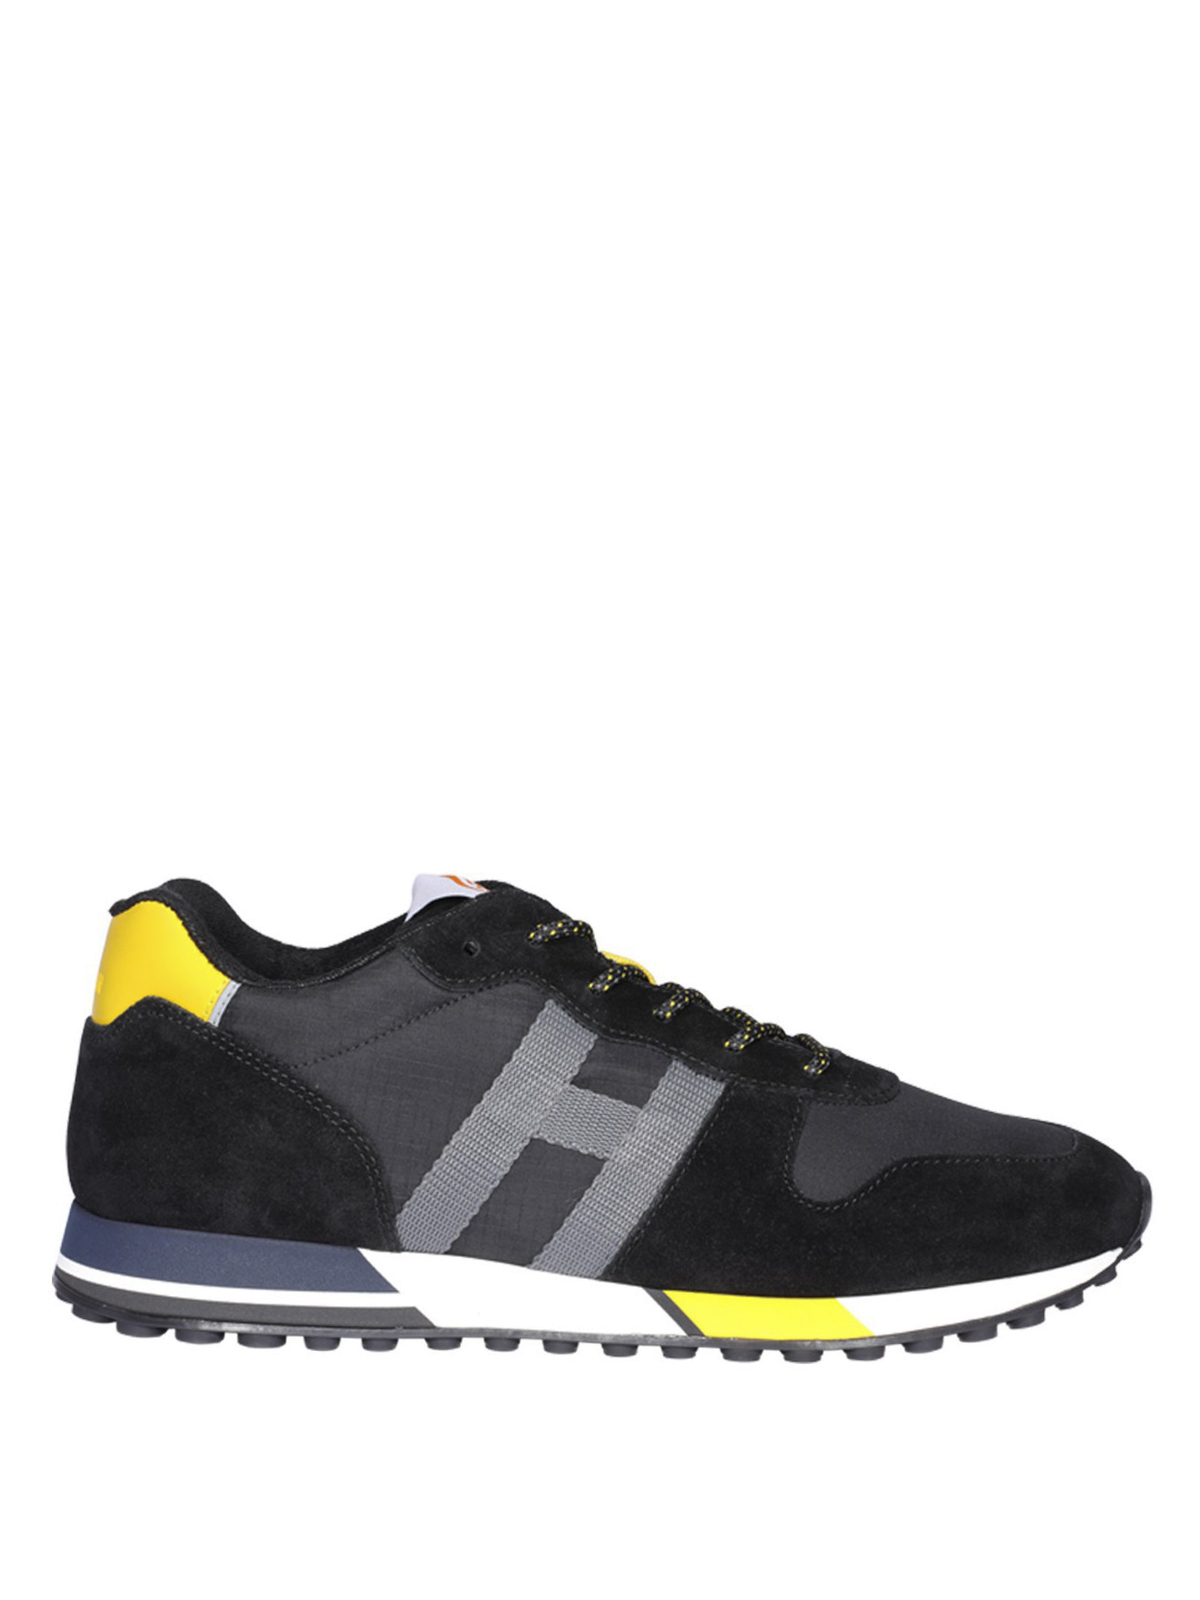 Hogan - H383 black fabric and suede sneakers - trainers ...